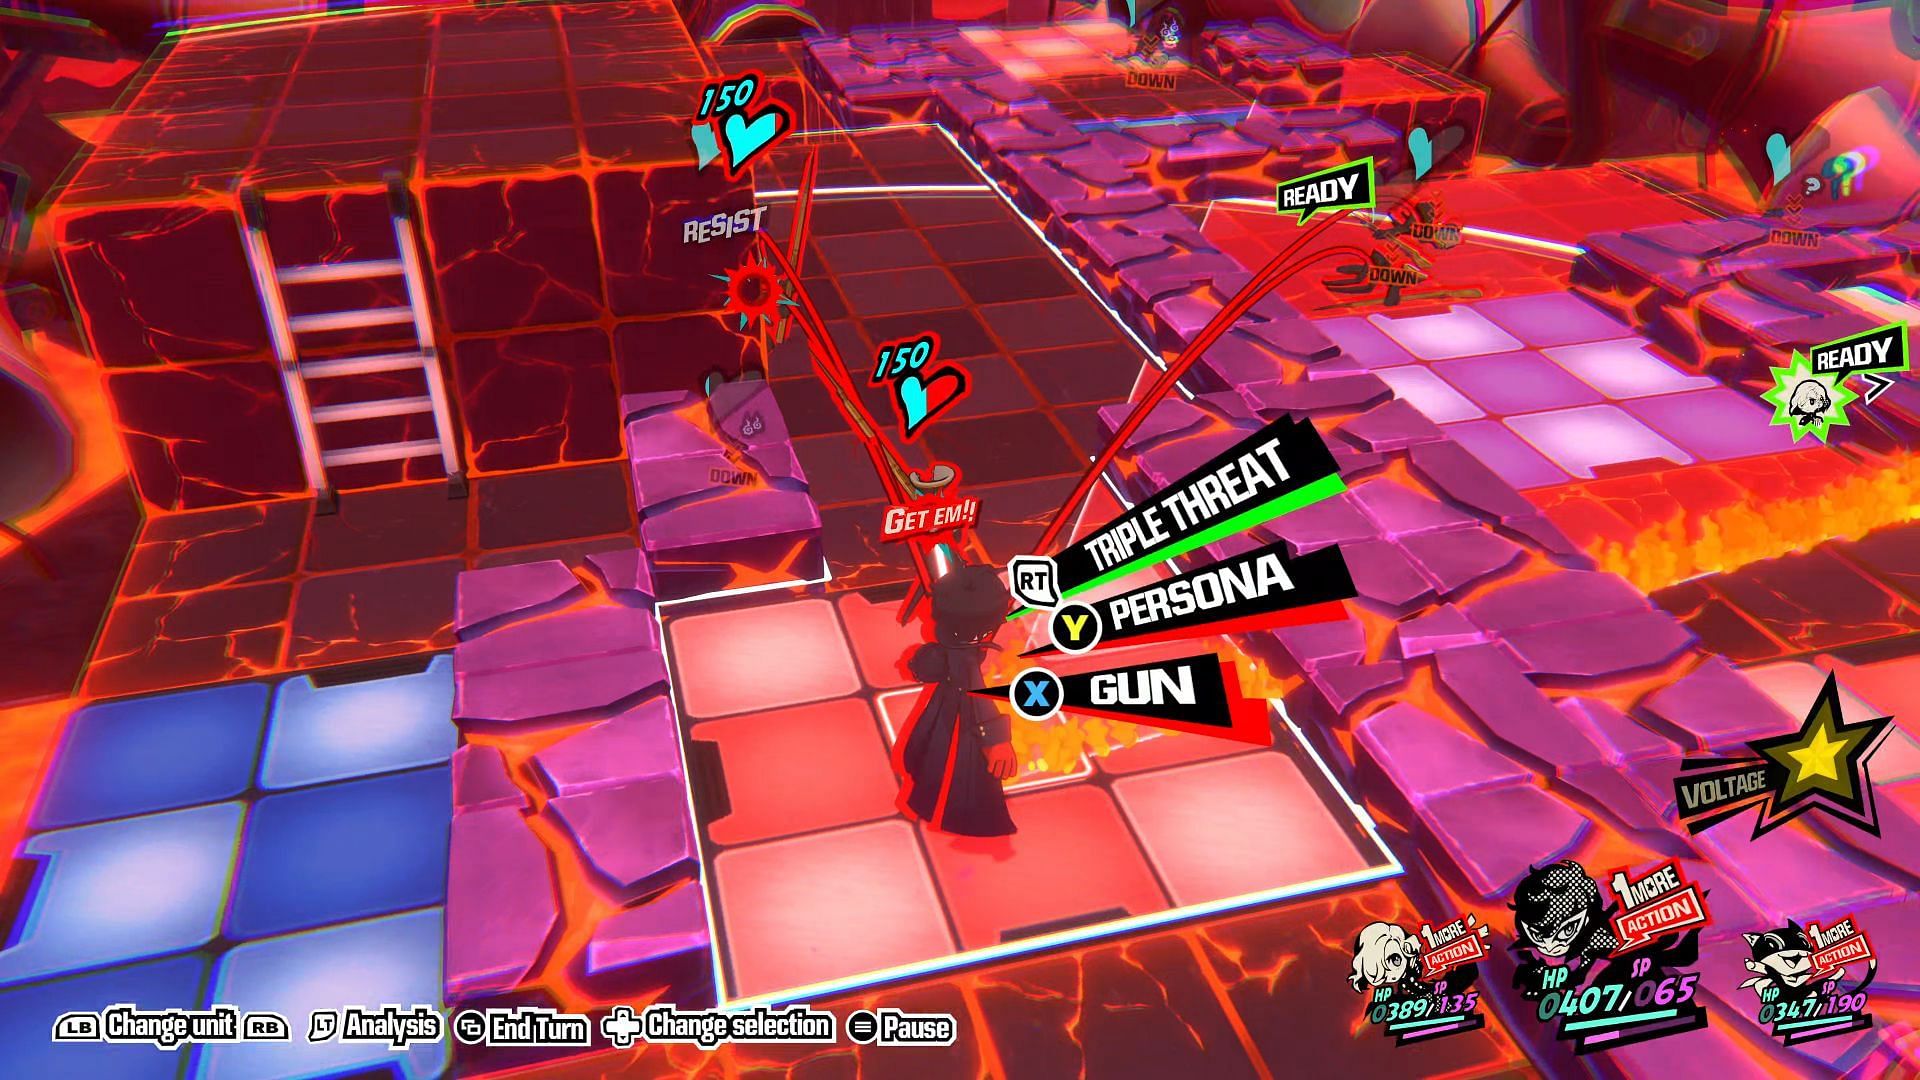 Continue expliting One More to help Joker to the back of the arena (image via Atlus)